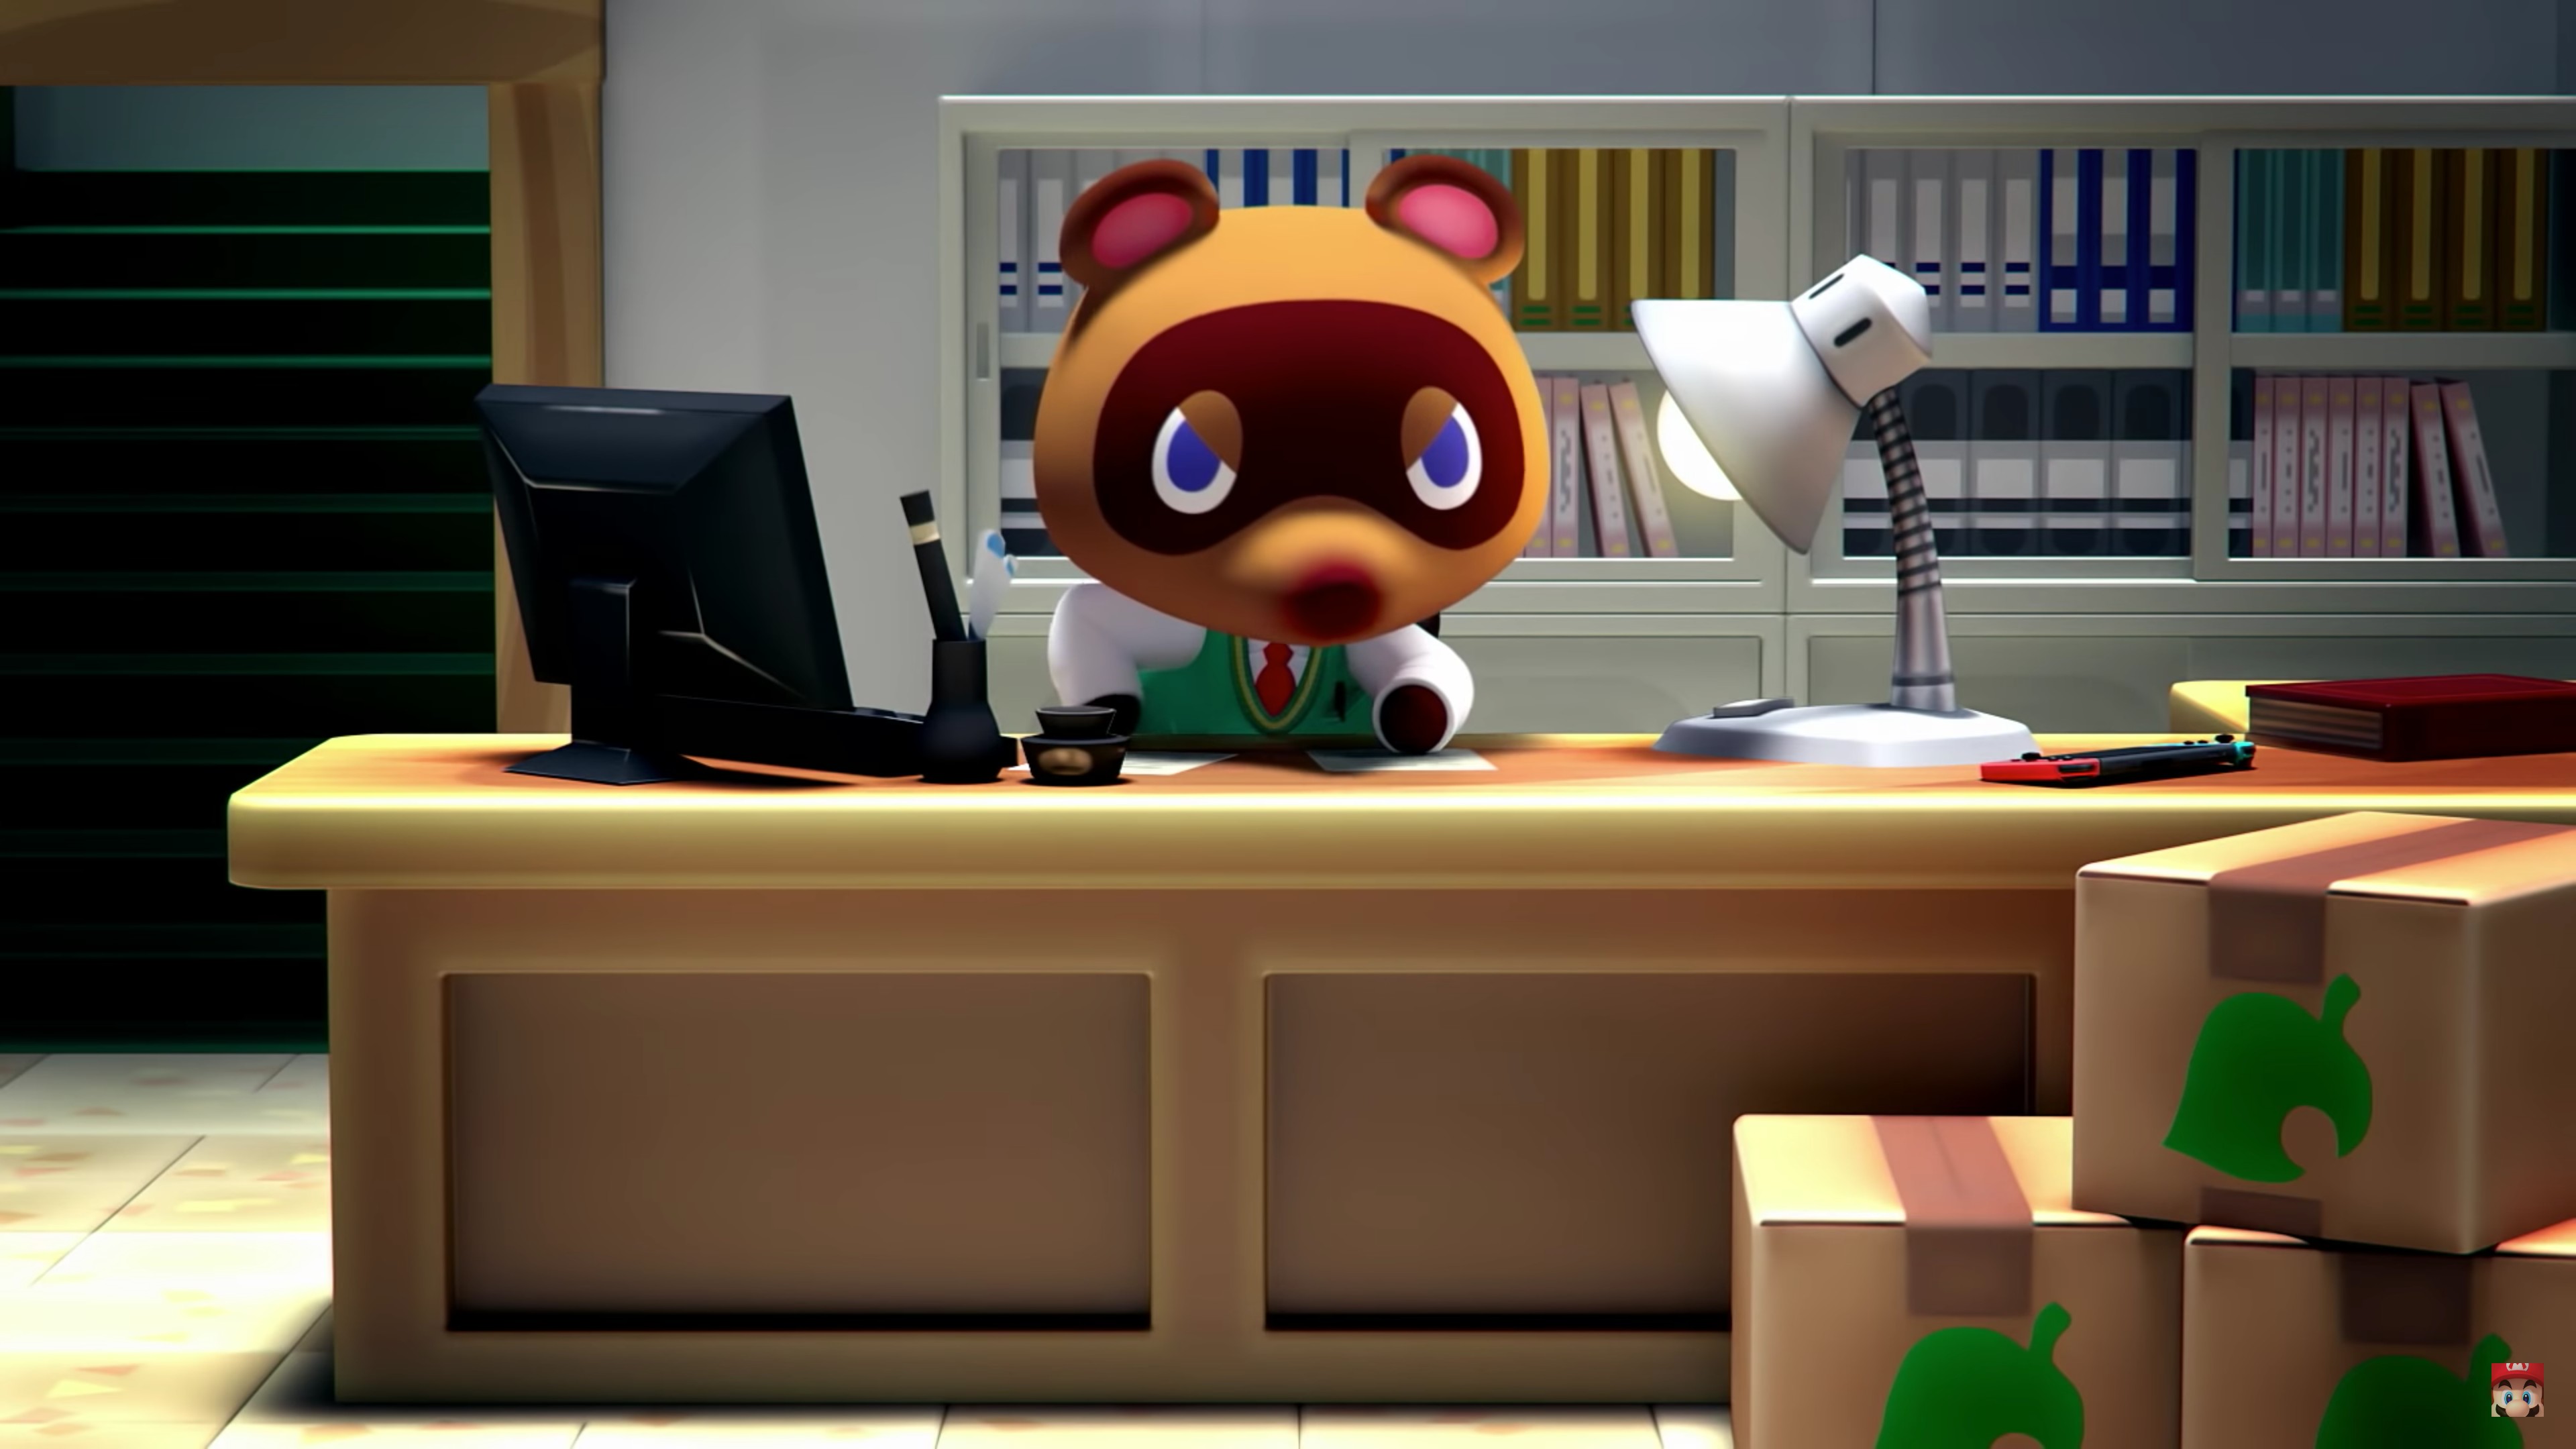 Animalcrossing Cat Porn - Animal Crossing Porn Combines Villagers and the Horniness of Isolation